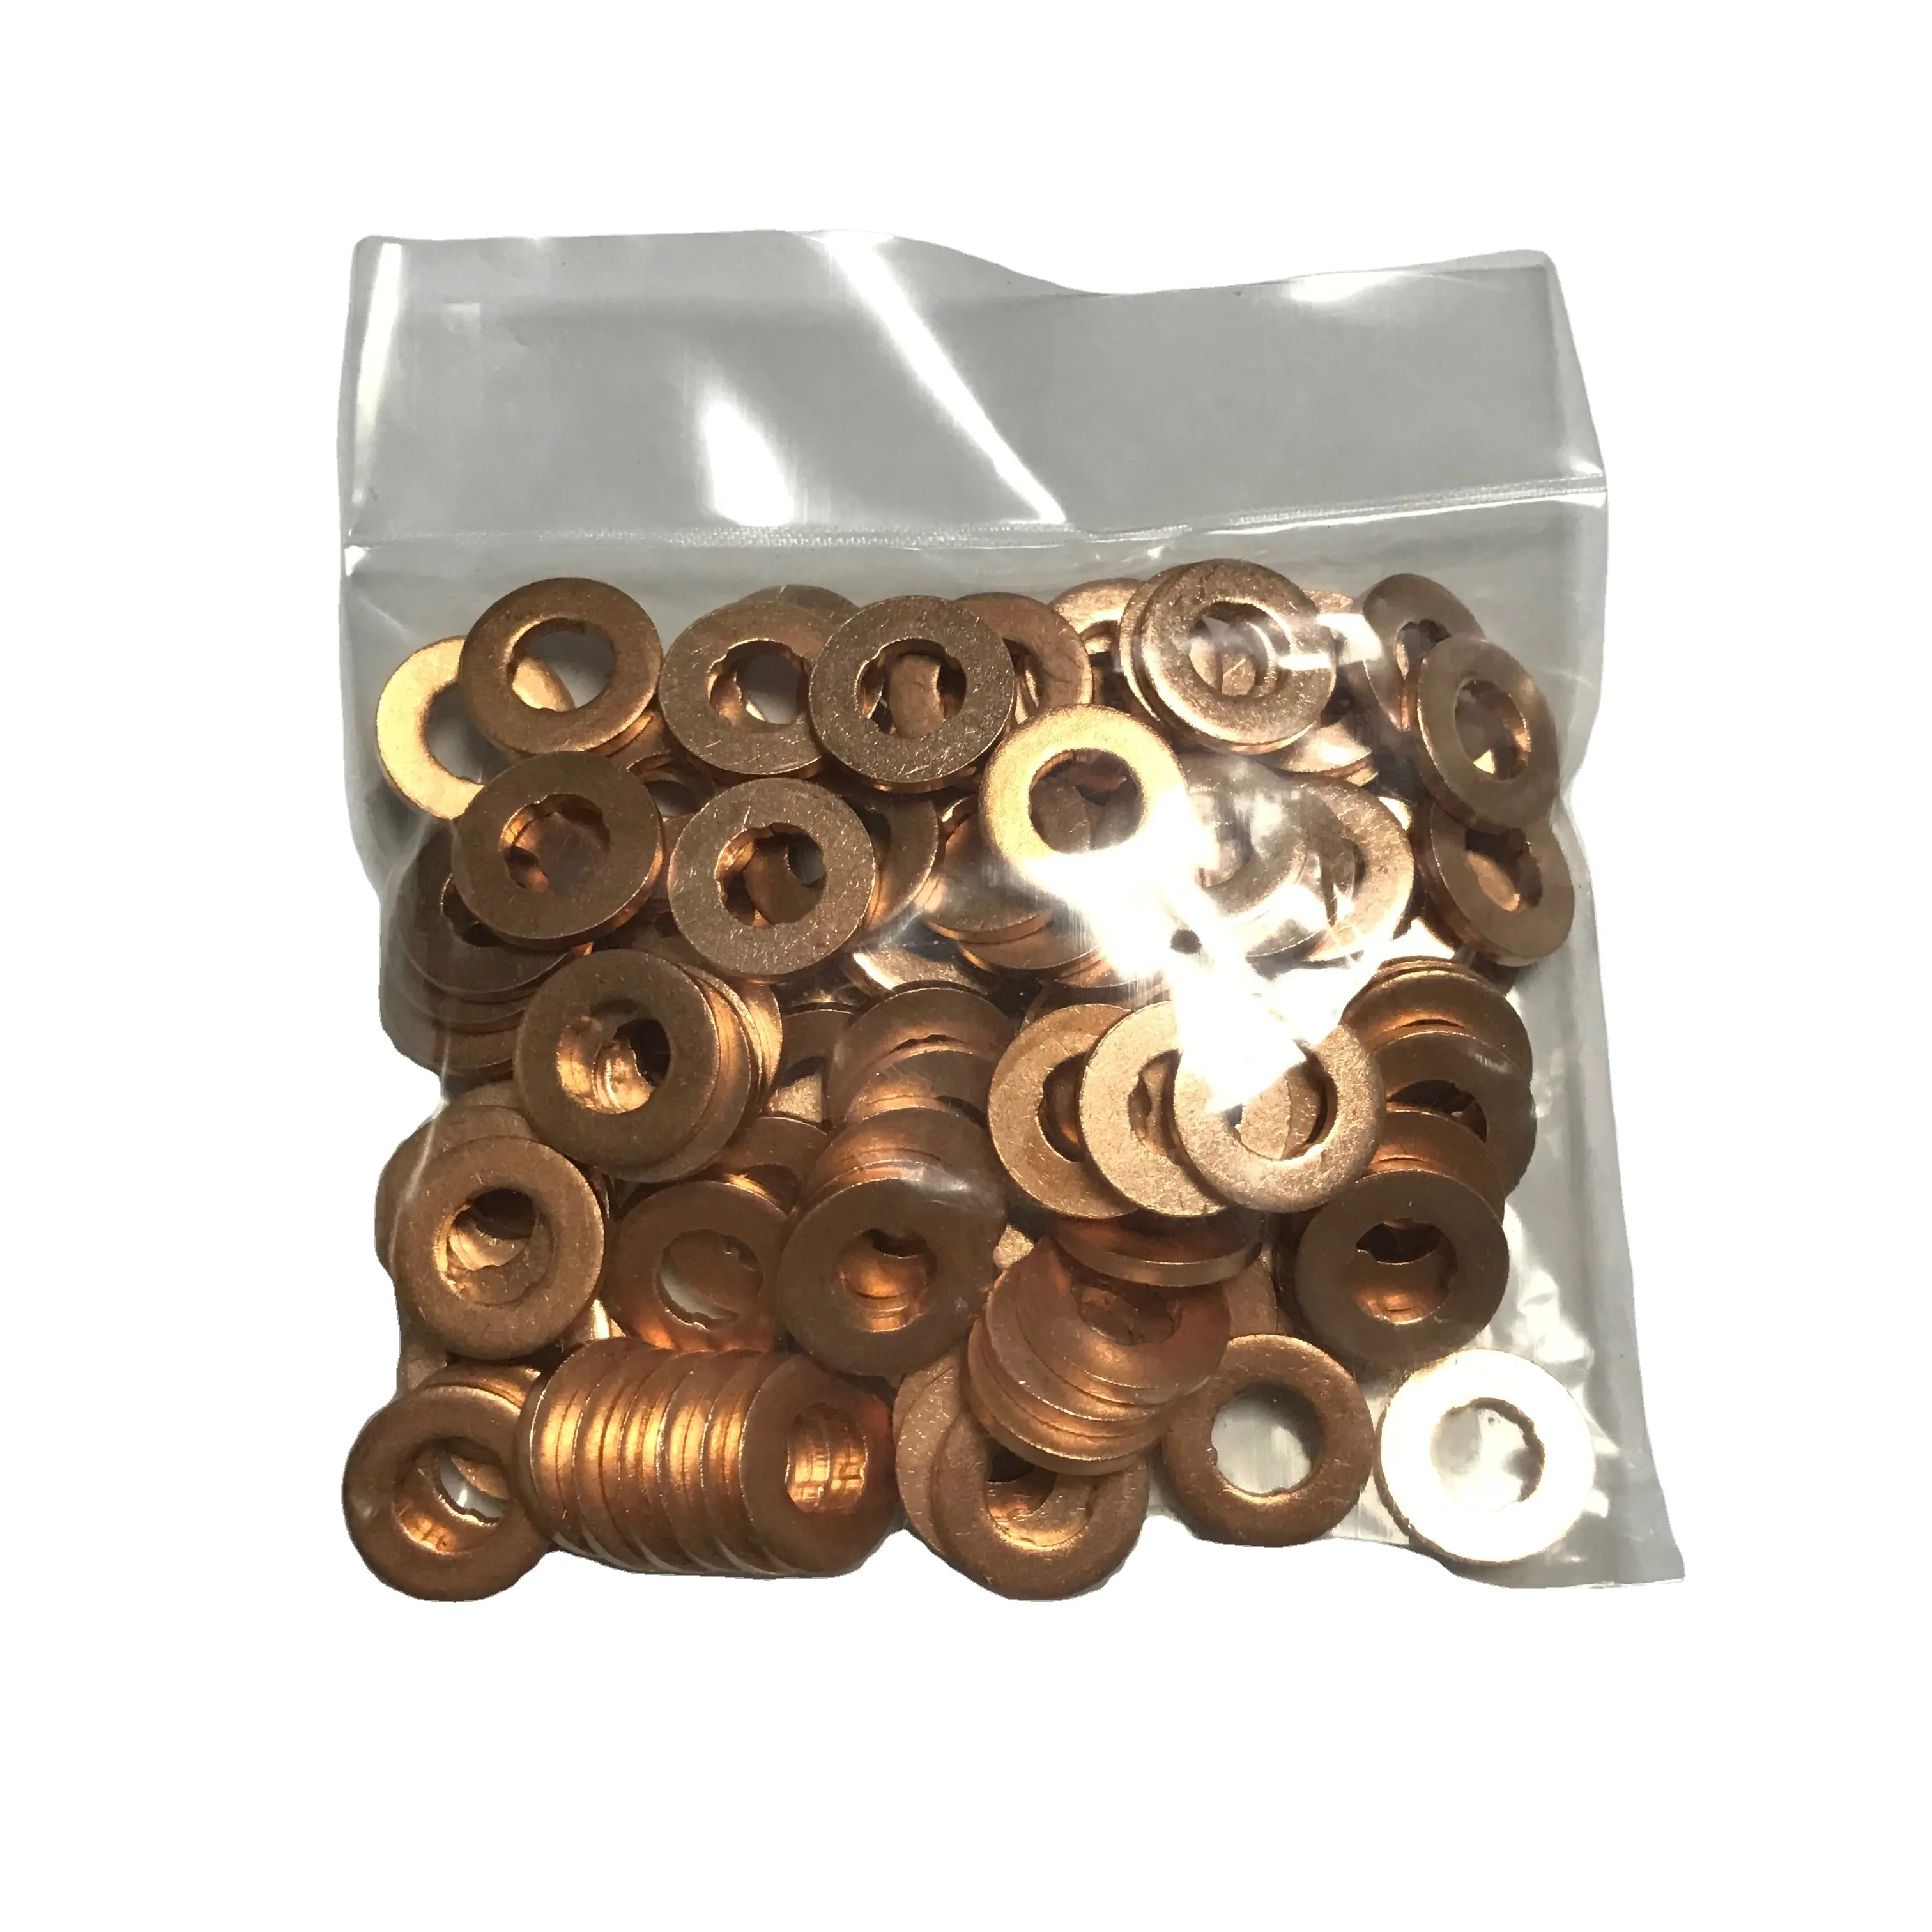 Injector oil seal shim F00vc17503 copper washer with high precision